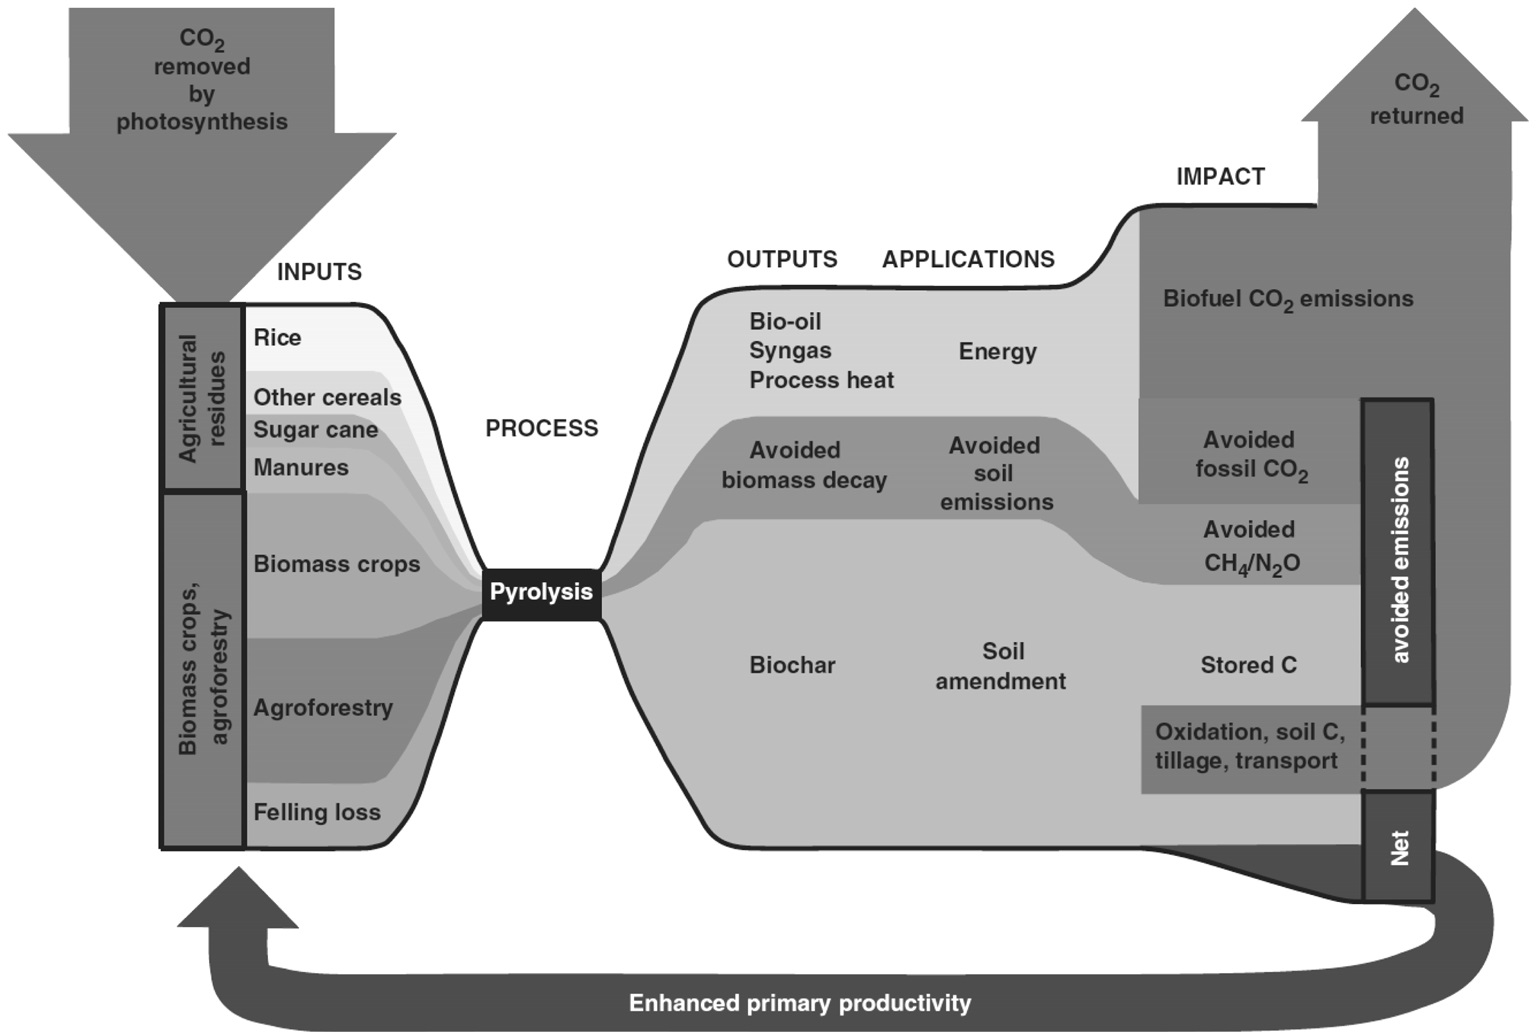 Overview of the sustainable biochar concept[14], with permission from the publisher.